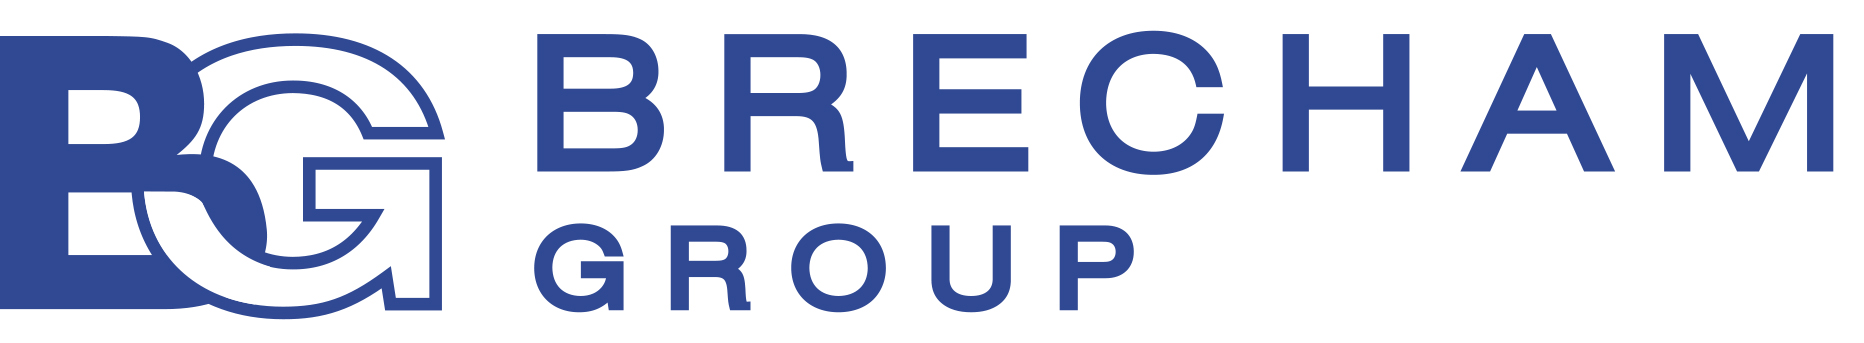 BrechamGroup